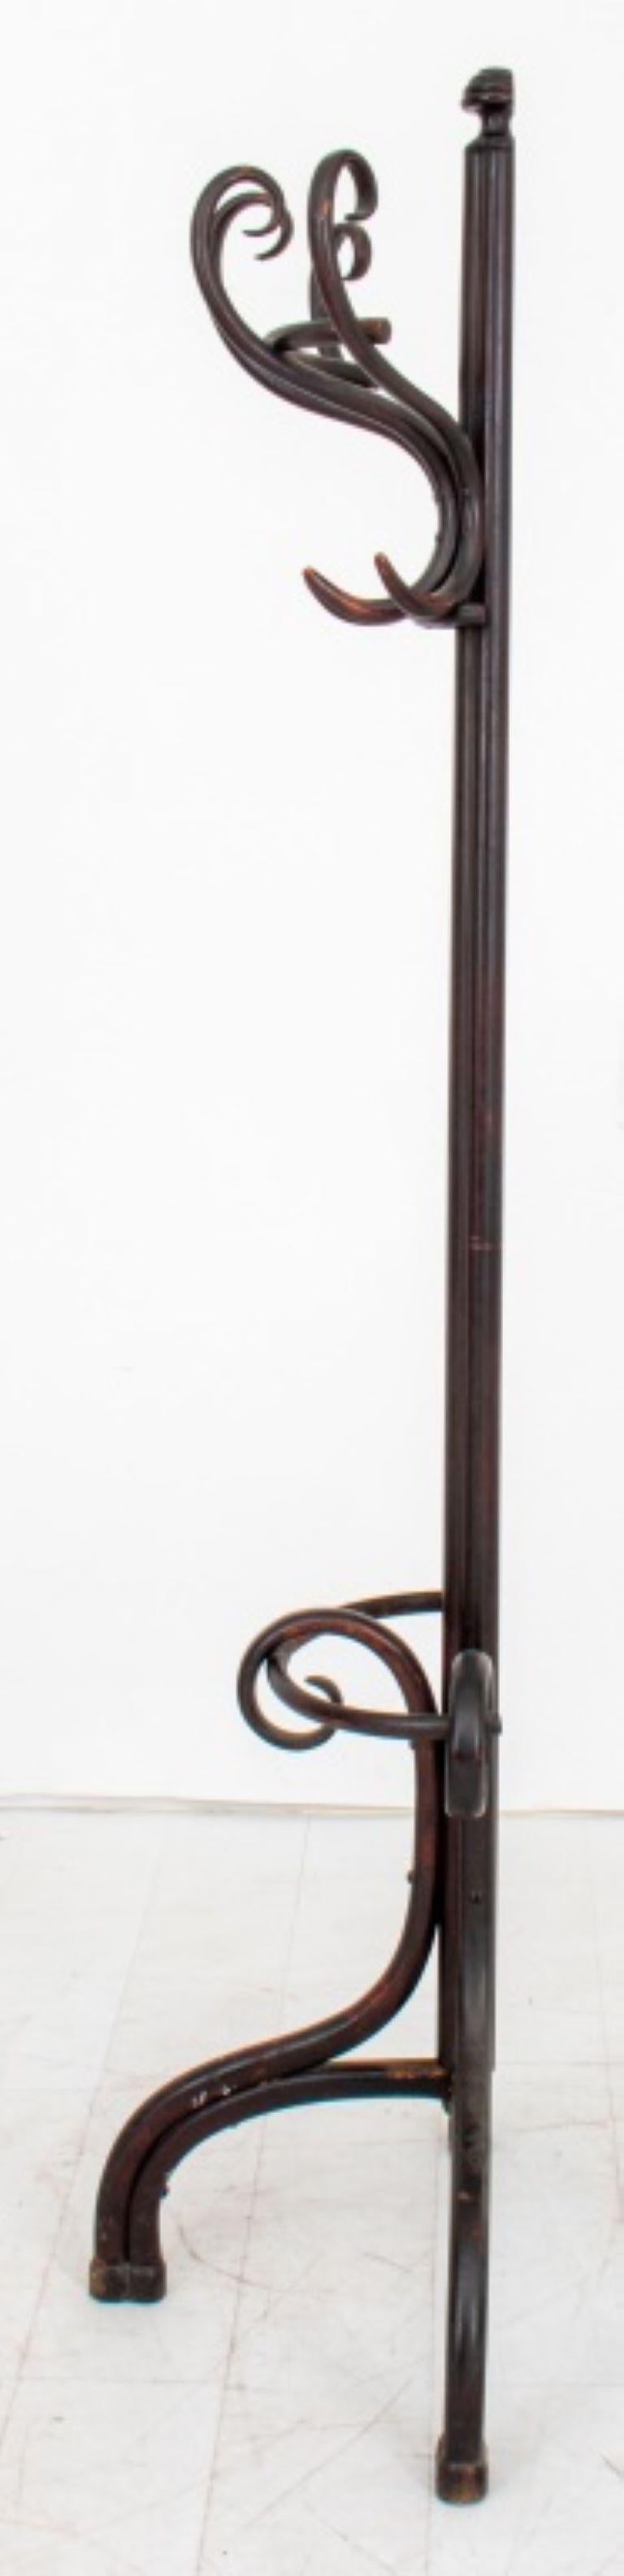 Thonet Bentwood Hall Coat Rack For Sale 2